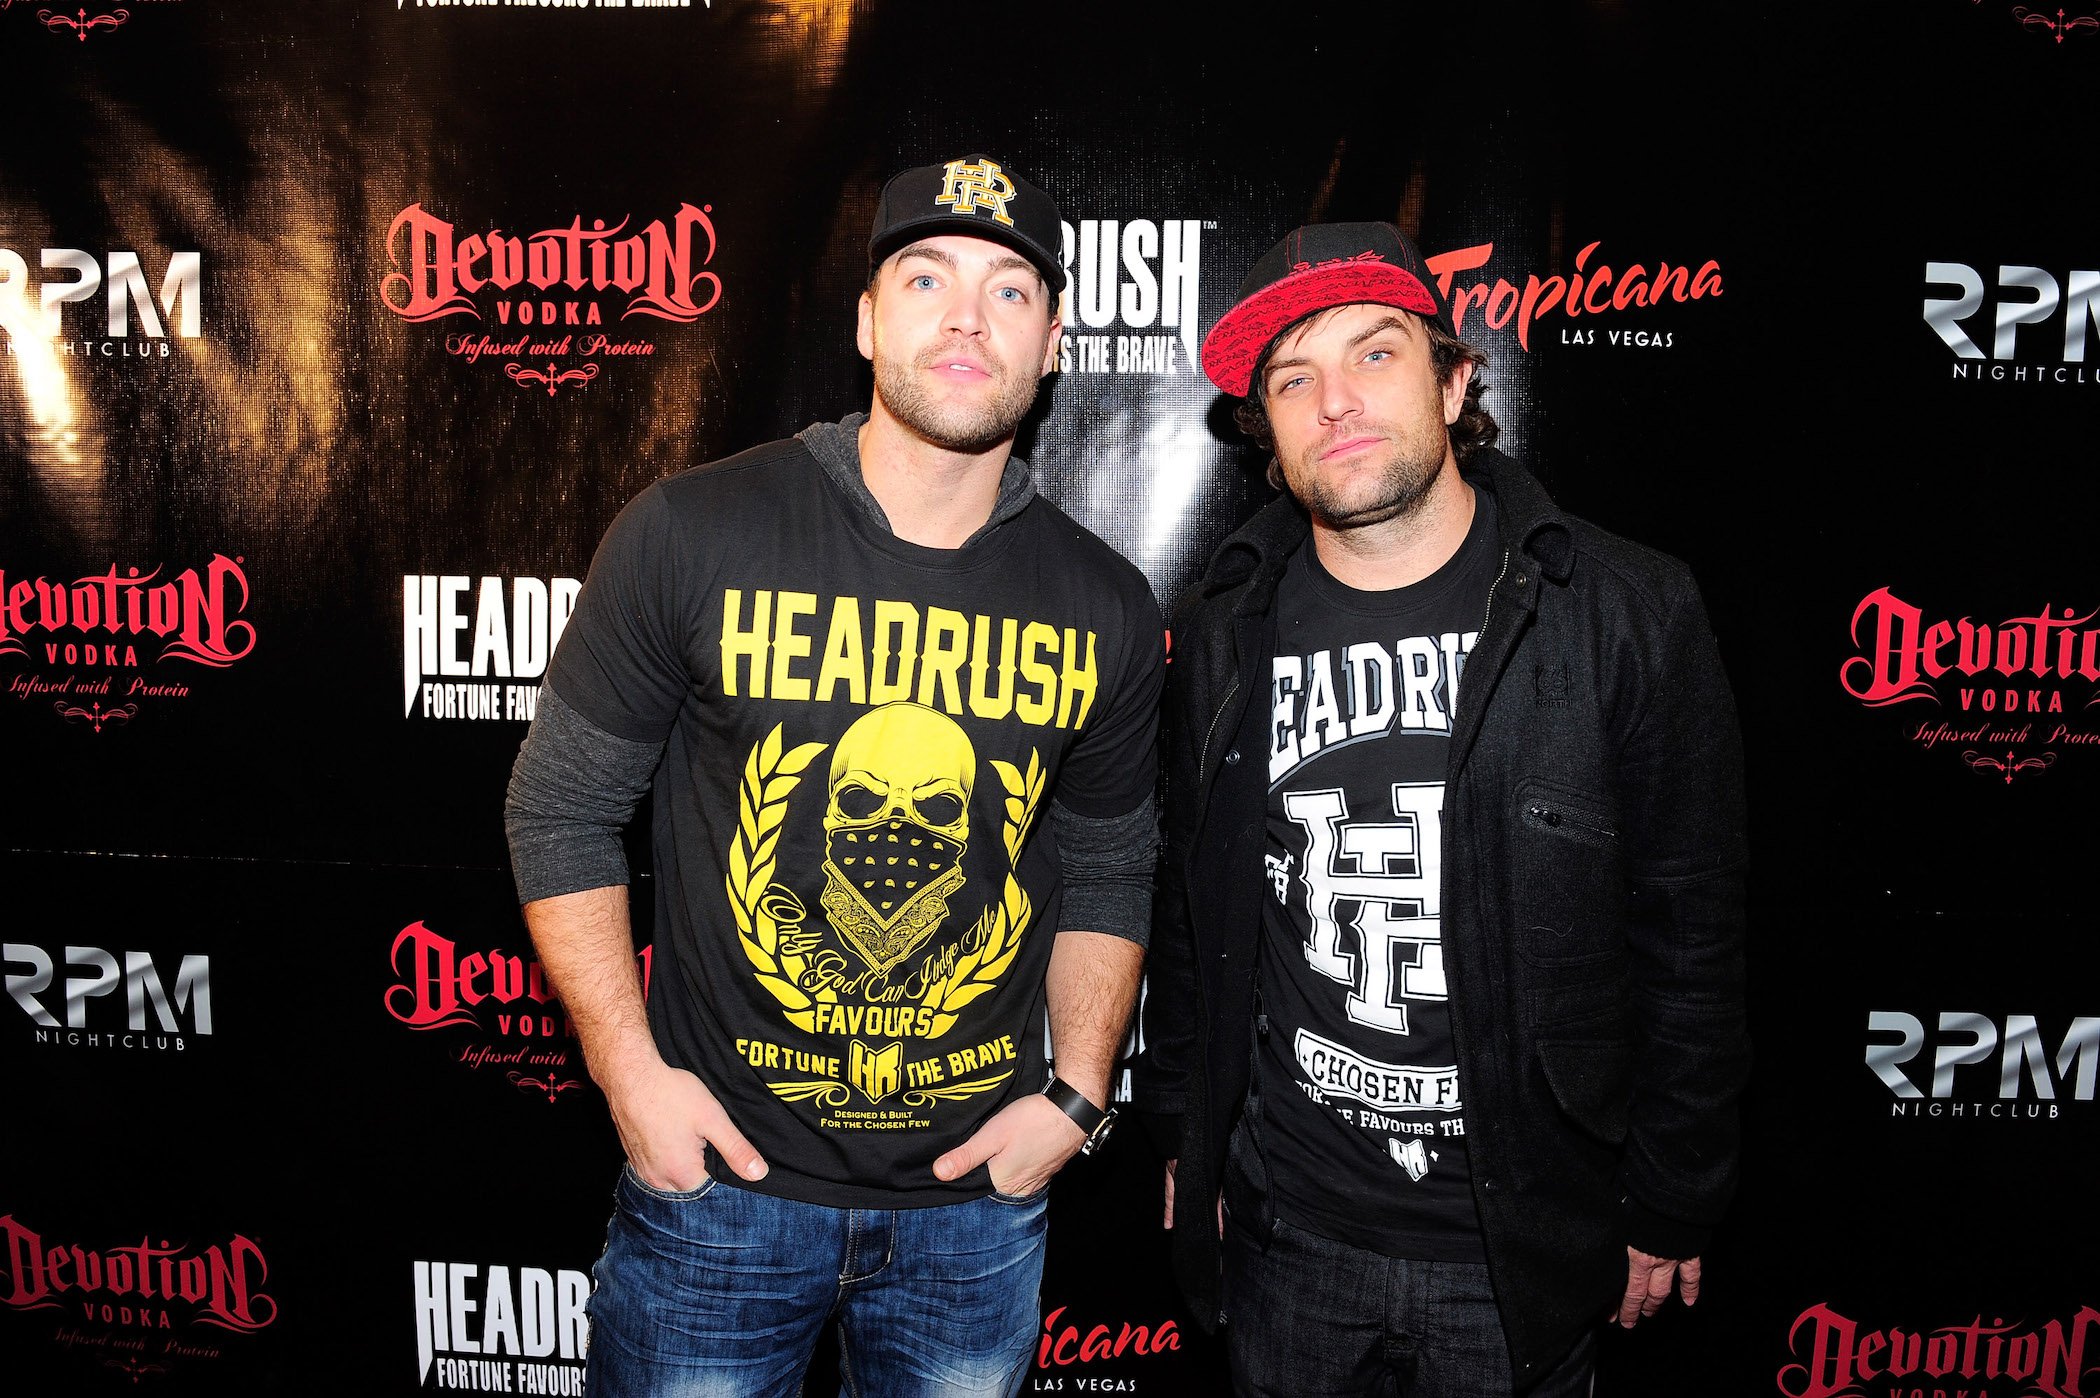 CT Tamburello and T.J. Lavin from MTV's 'The Challenge' Season 37 standing next to each other at an event against a dark background. 'The Challenge' Season 37 spoilers note CT wins.